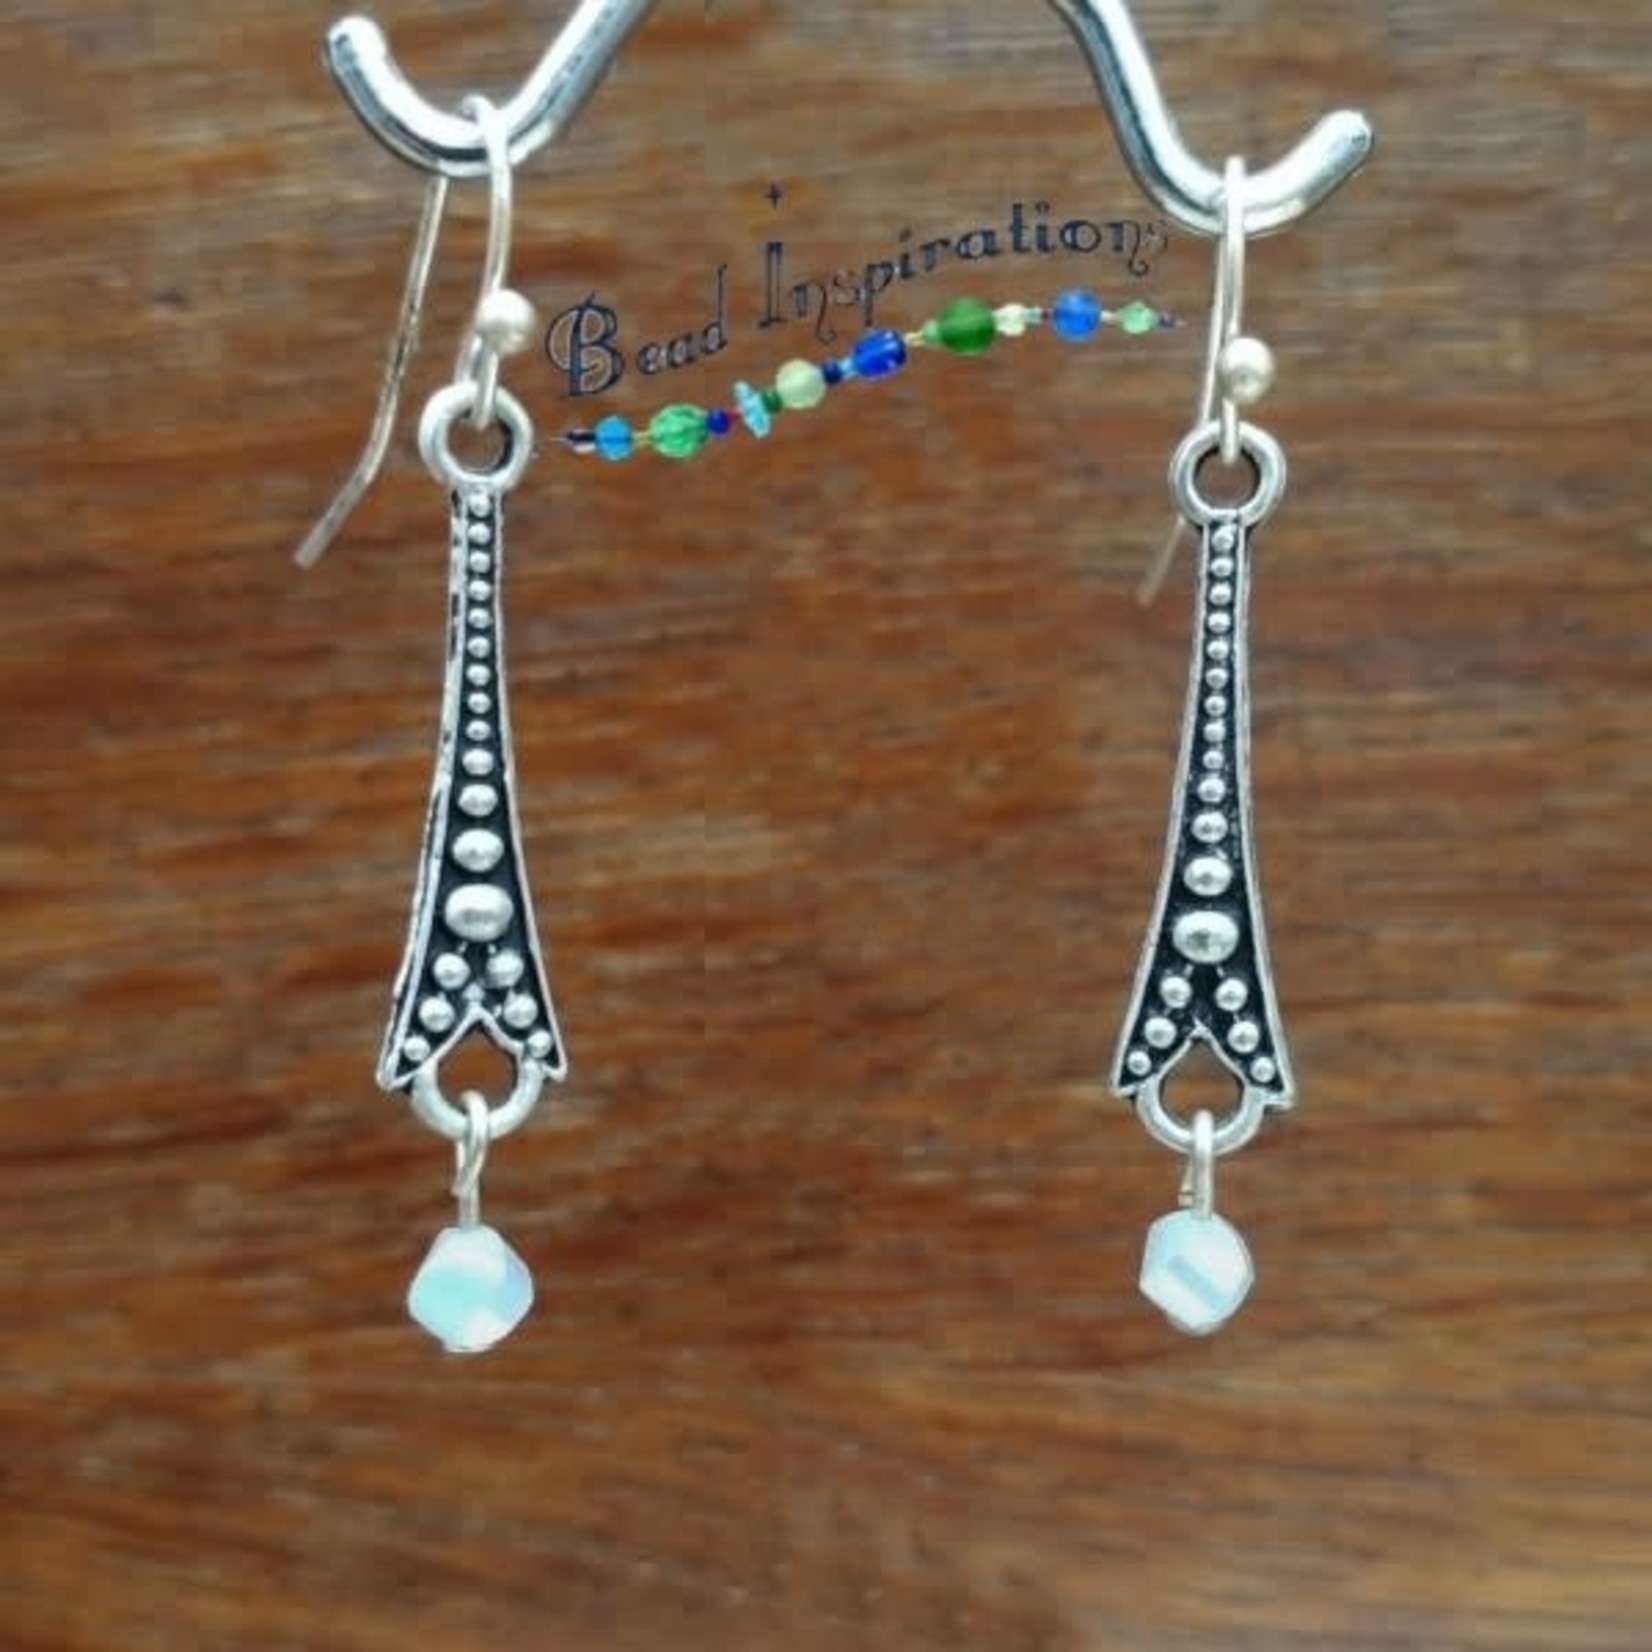 Bead Inspirations Tapered Bead Earring Kit